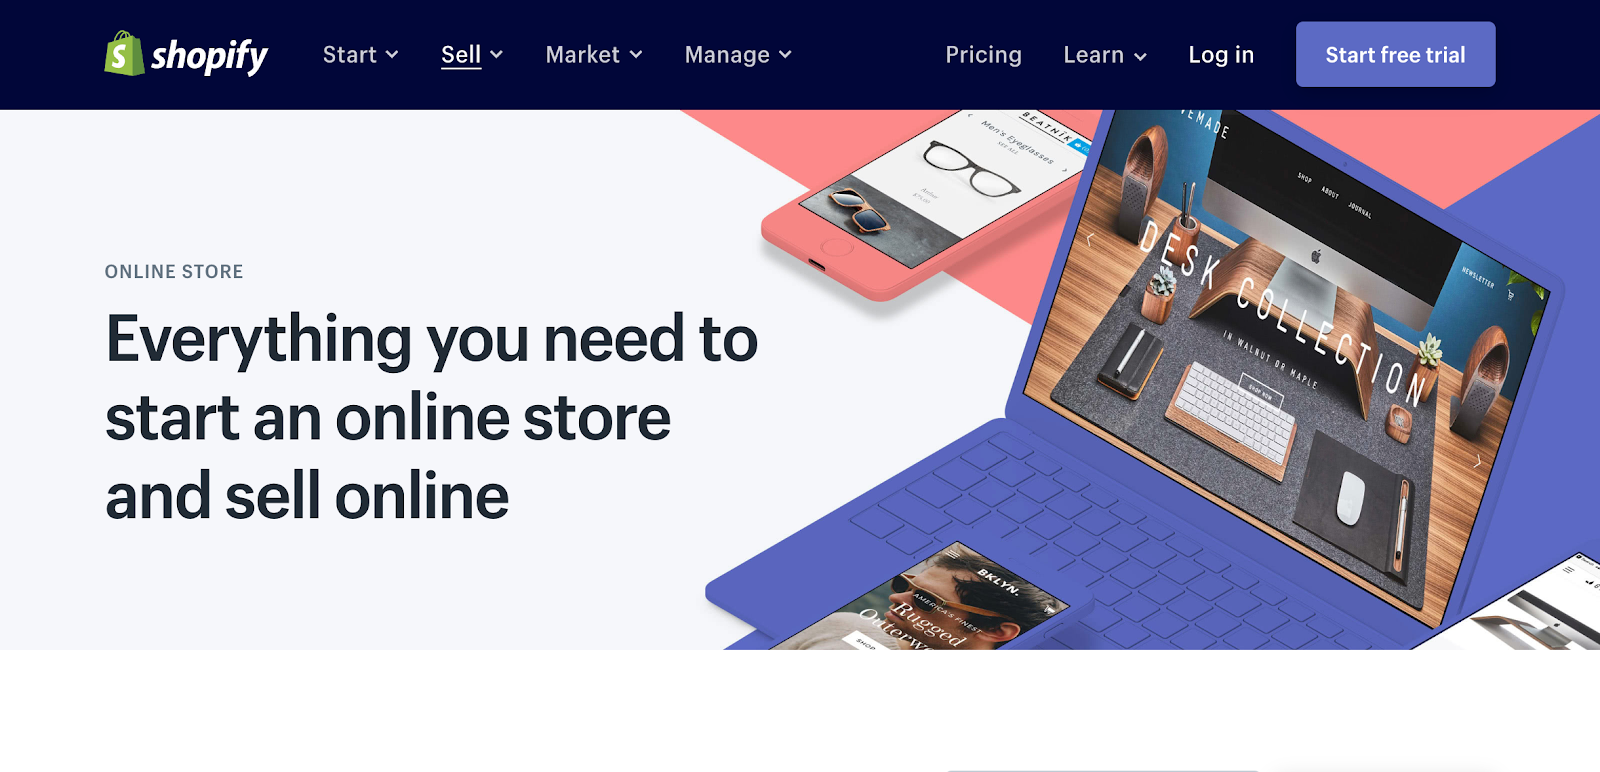 AwesomeScreenshot Sell Products Online Start an Online Store Free Trial 2019 07 10 12 07 29